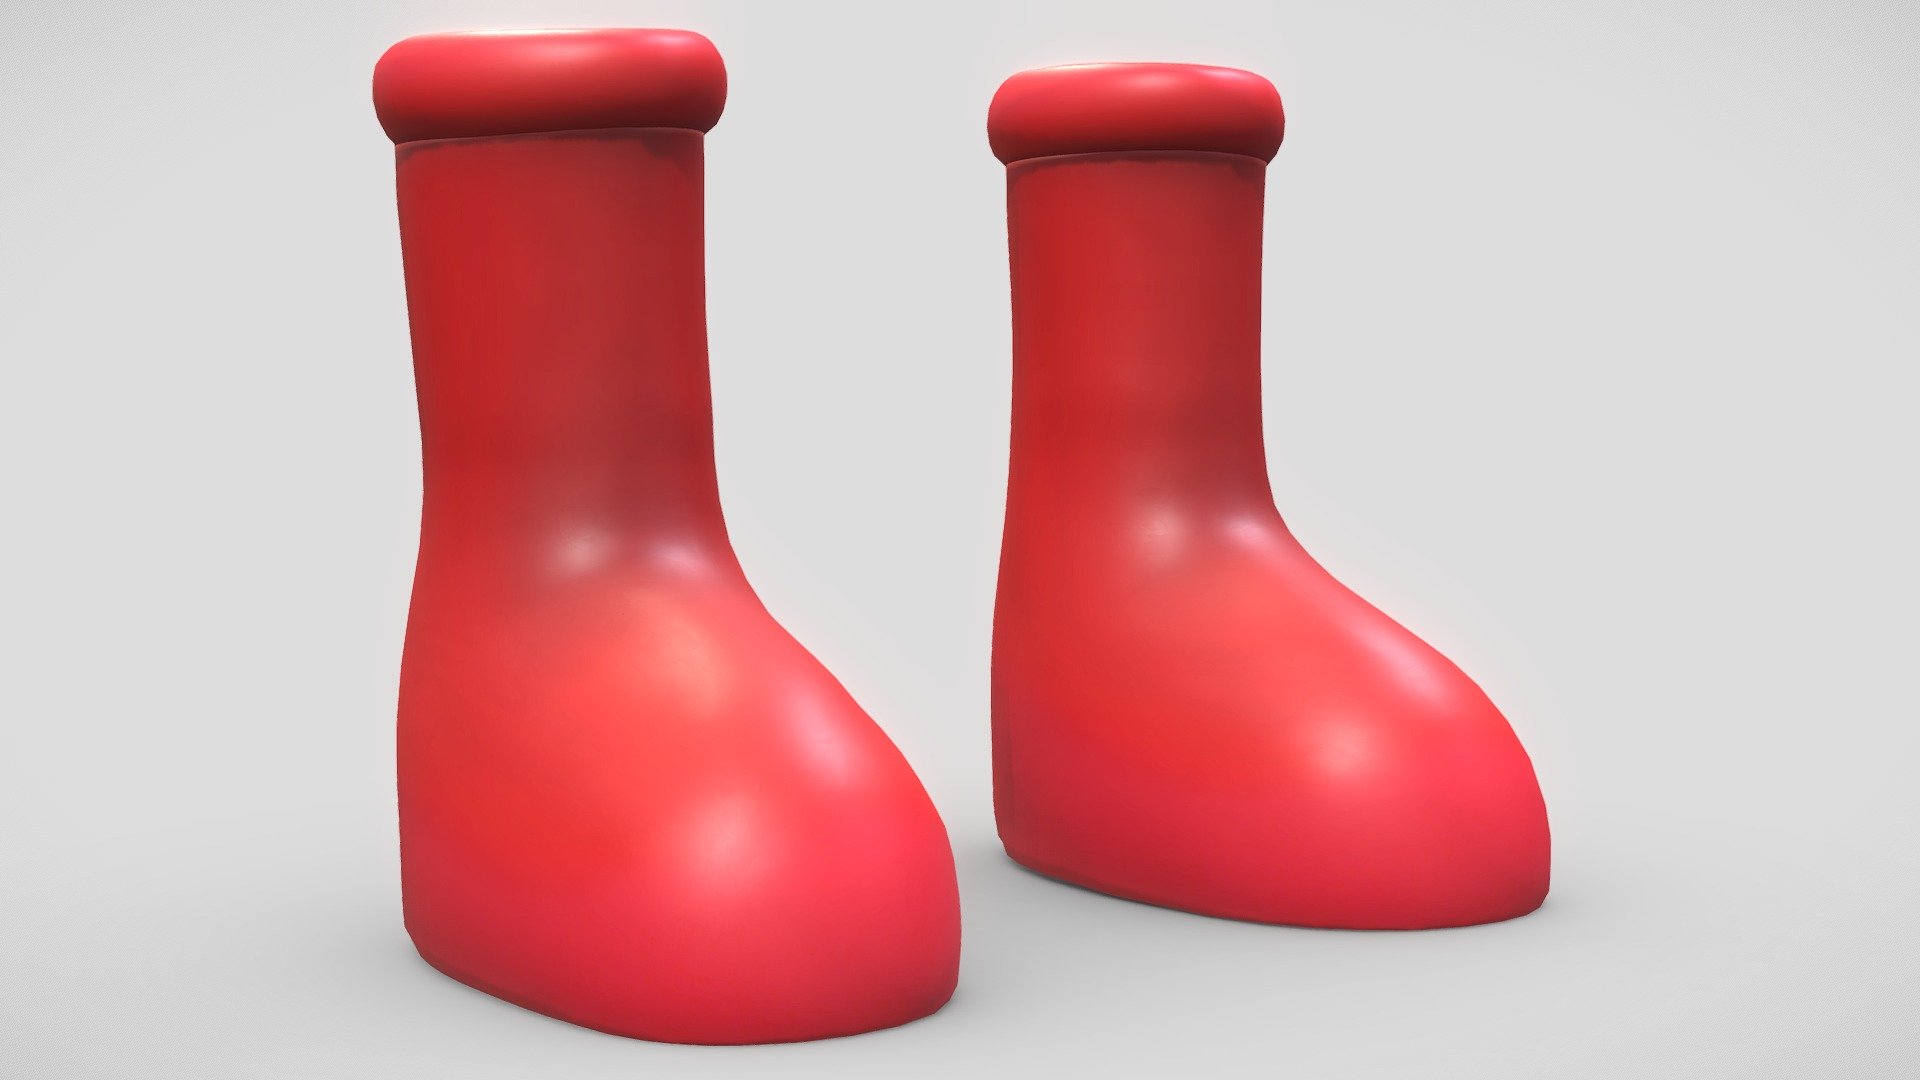 A Very Detailed scanned shoes with High-Quality .Reay to use in virtual try on project and game sim 4 or second life.

The Mesh is UV unwrapped.The length of all my shoes is about 24cm.

4096x4096 difuse and Normal Texture Map PBR jpg format，in the compressed file rar.

File contains :

zbrush (2021.6.6),FBX .OBJ .stl.collada(dae).Difuse map and Normal Texture(jpg format).

If you want to change the colorway of the shoes, it is easy to do it with photopshop. If you want to change the colorway or decrease the polycourt ,I am willing to do it.

This is a professional scanning agency, if you want any other shoes, Don't hesitate to tell me.It will helps a lot.we are available for custom shoes scan.

Don't forget to check my other sneakers,Have a nice day：） - MSCHF BIG RED BOOT FASHION SNEAKER scanned - Buy Royalty Free 3D model by Vincent Page (@vincentpage) 3d model